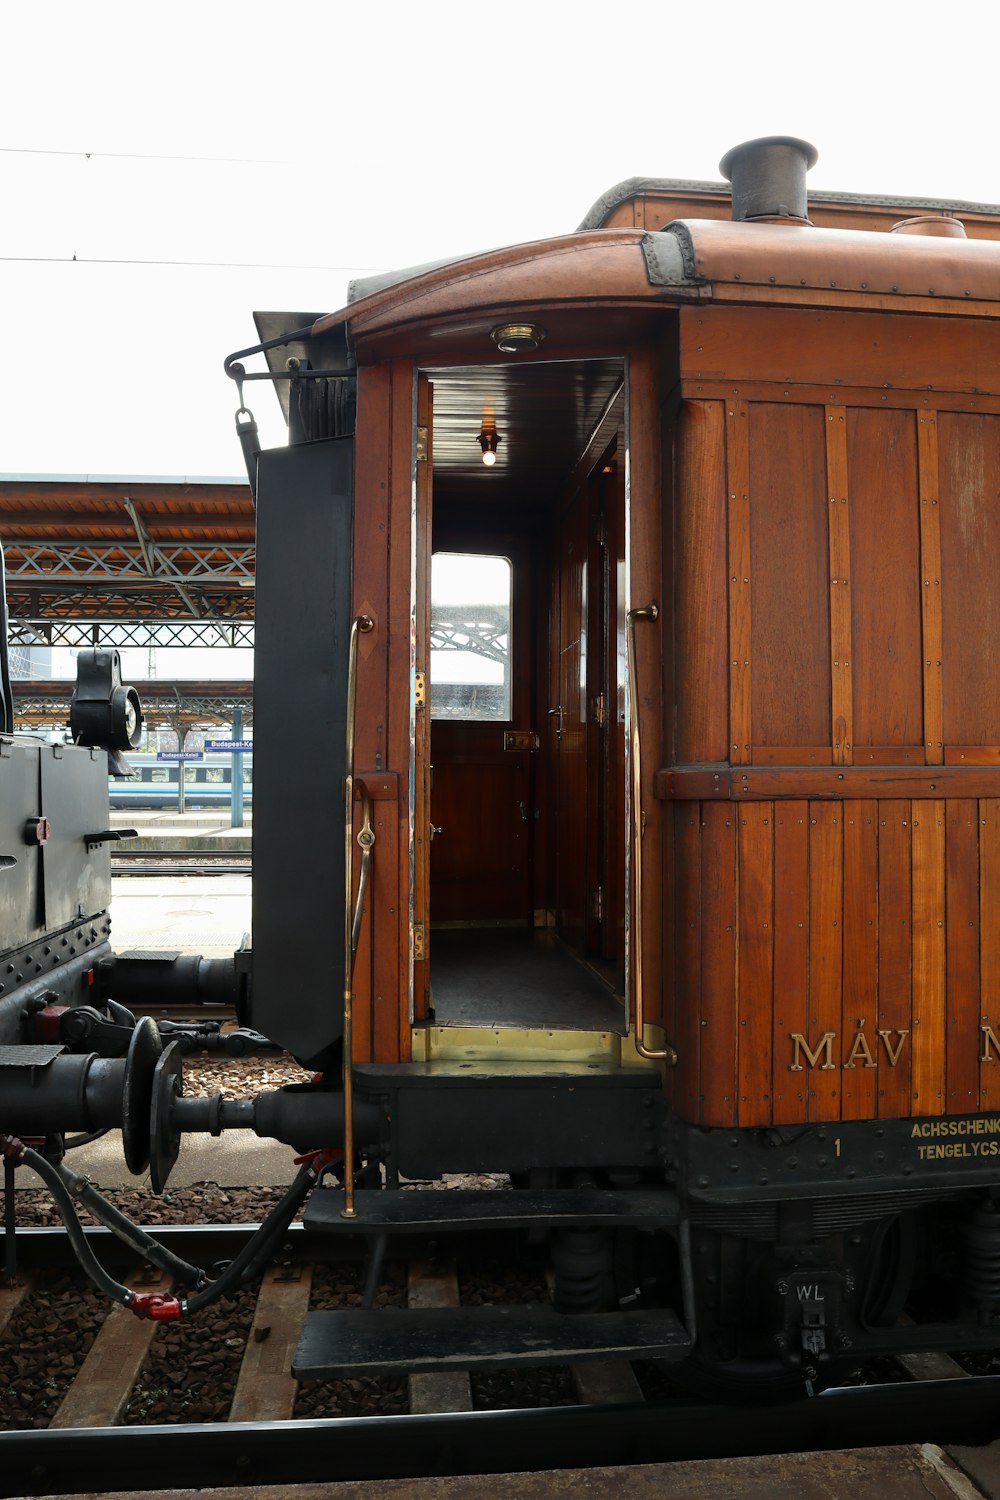 a small wooden train car sitting on the tracks